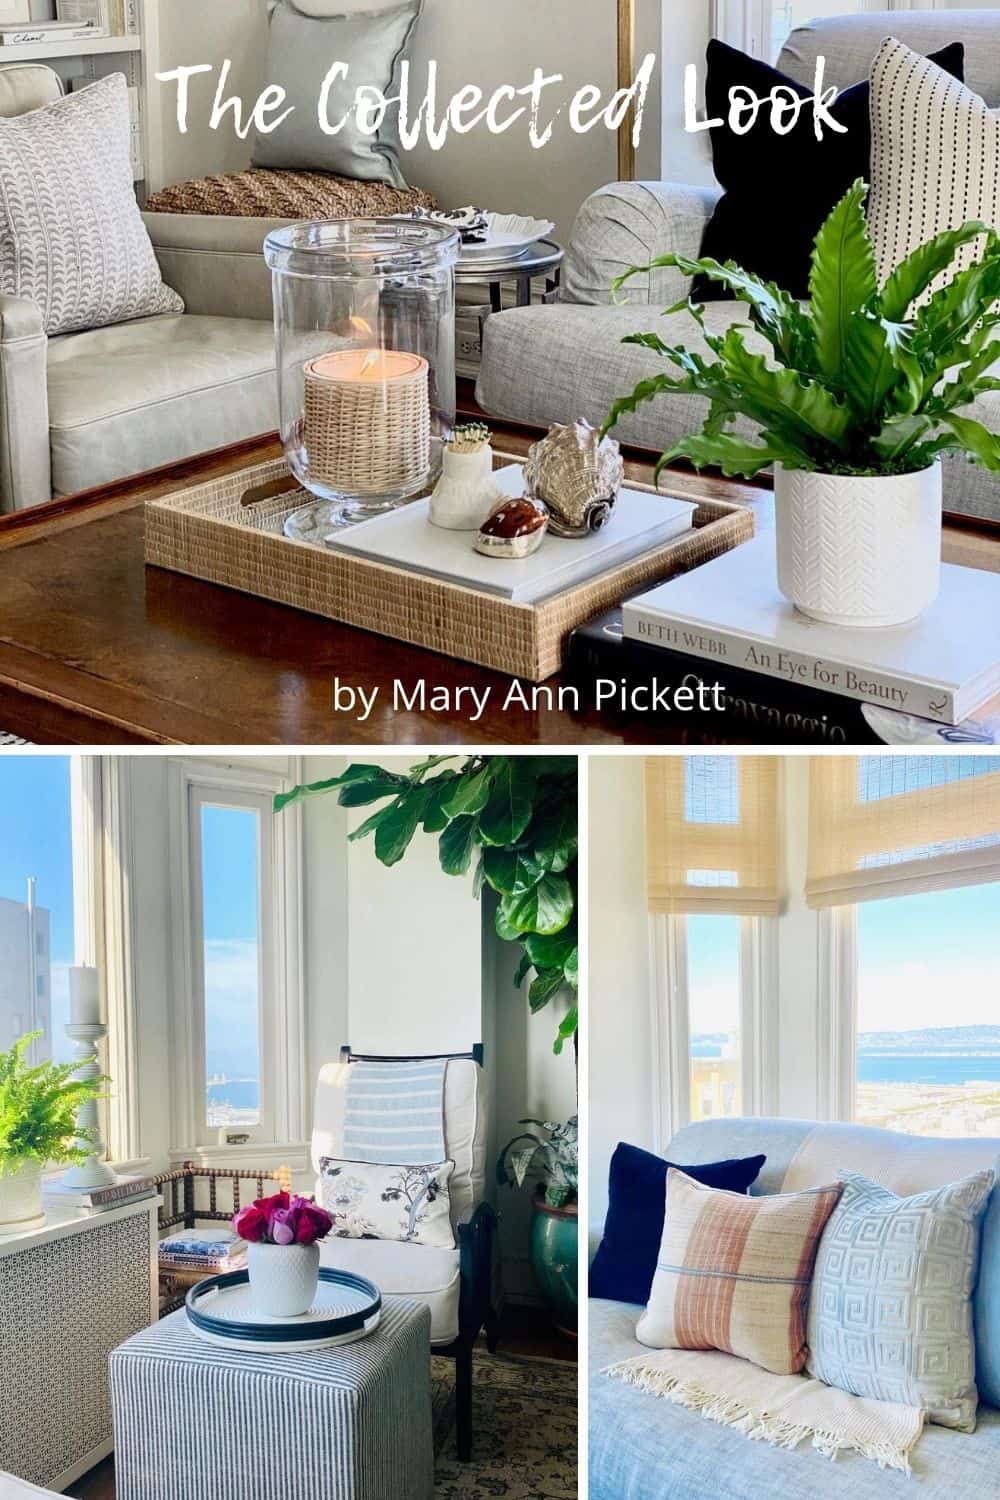 Mary Ann Pickett's Home with The Collected Look